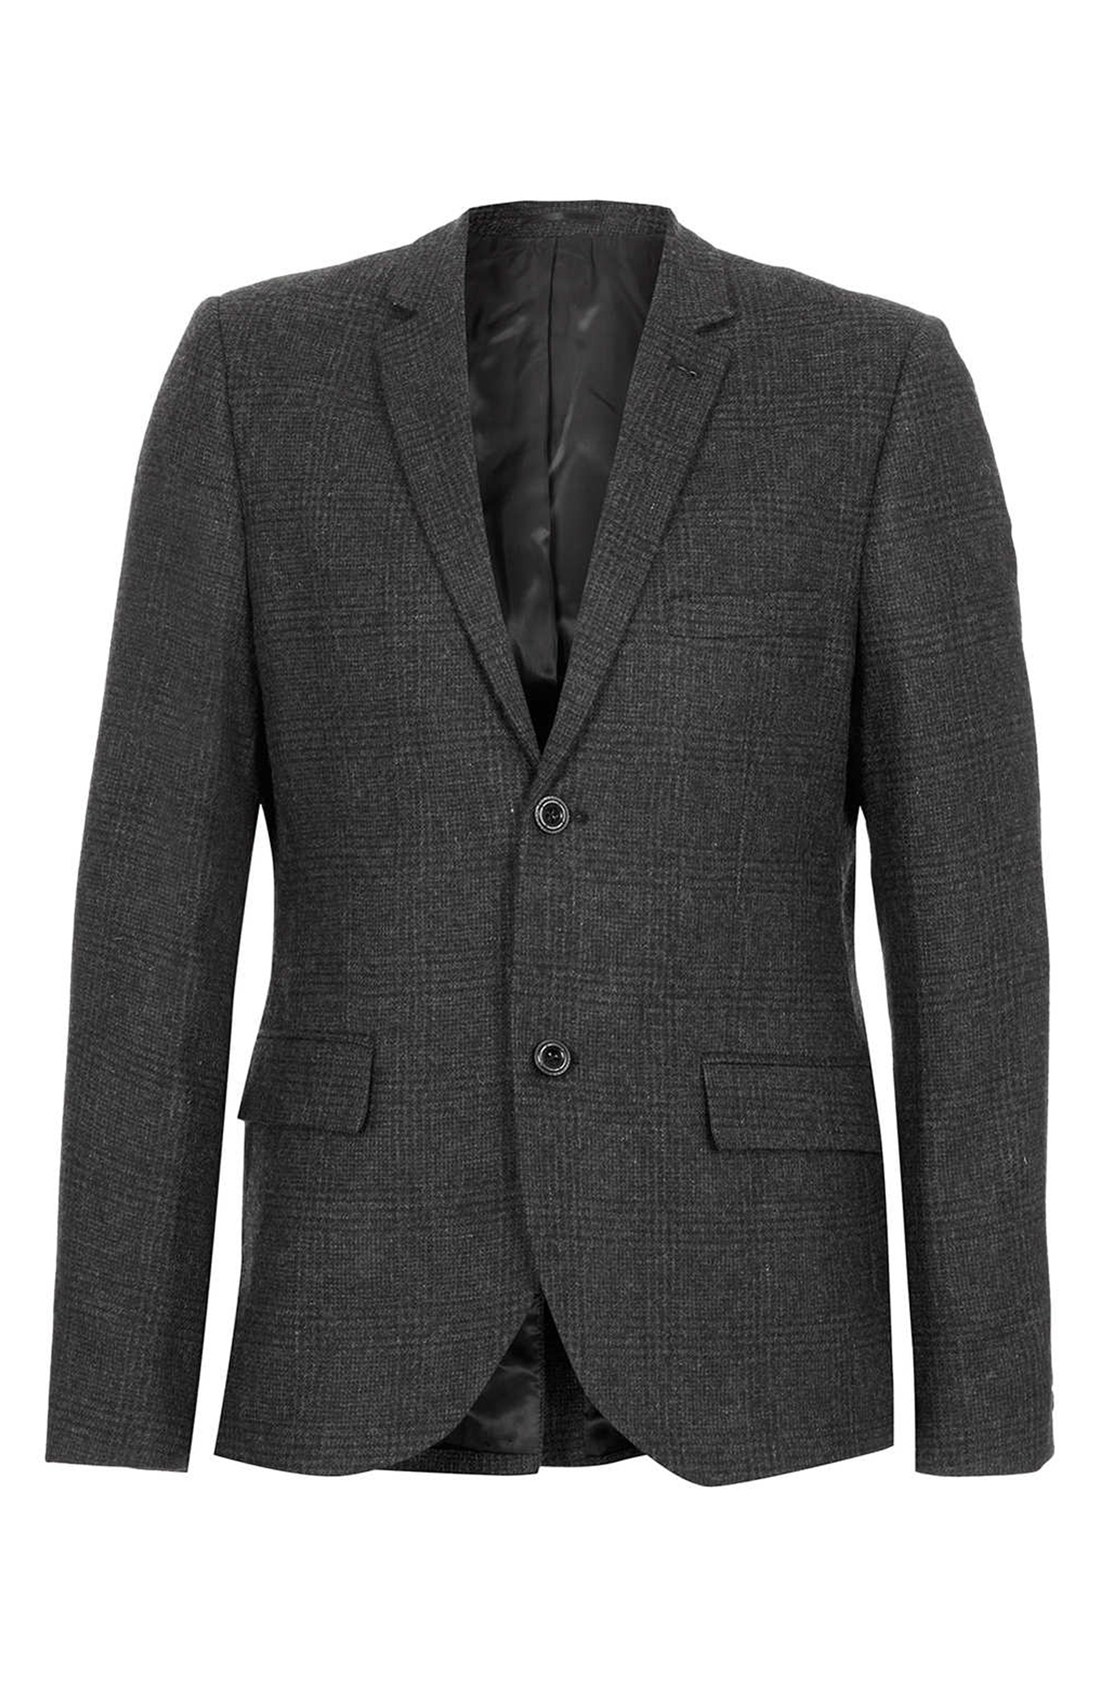 Topman Skinny Fit Check Blazer in Gray for Men (Charcoal) | Lyst